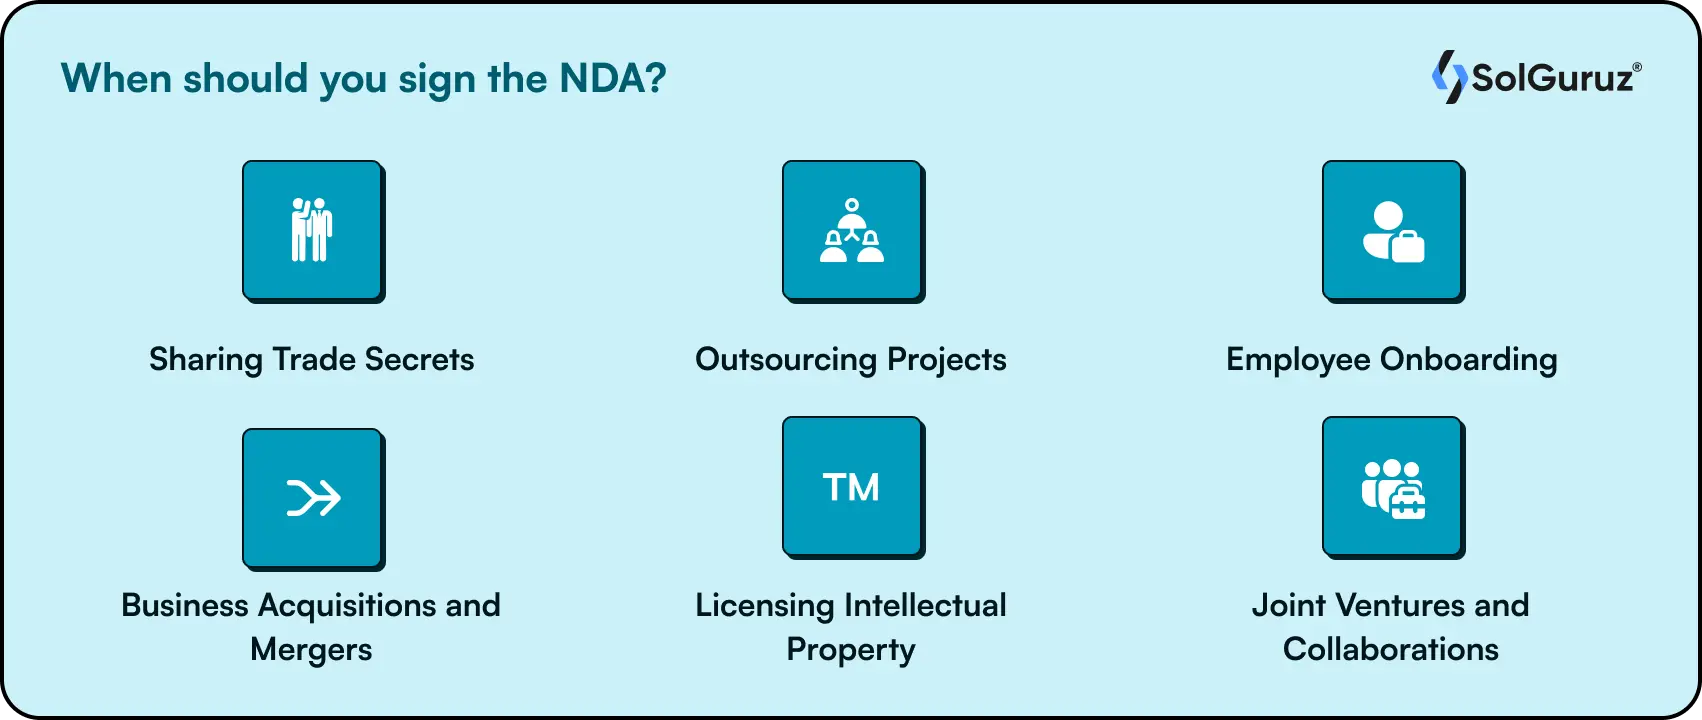 When should you sign the NDA for App Development